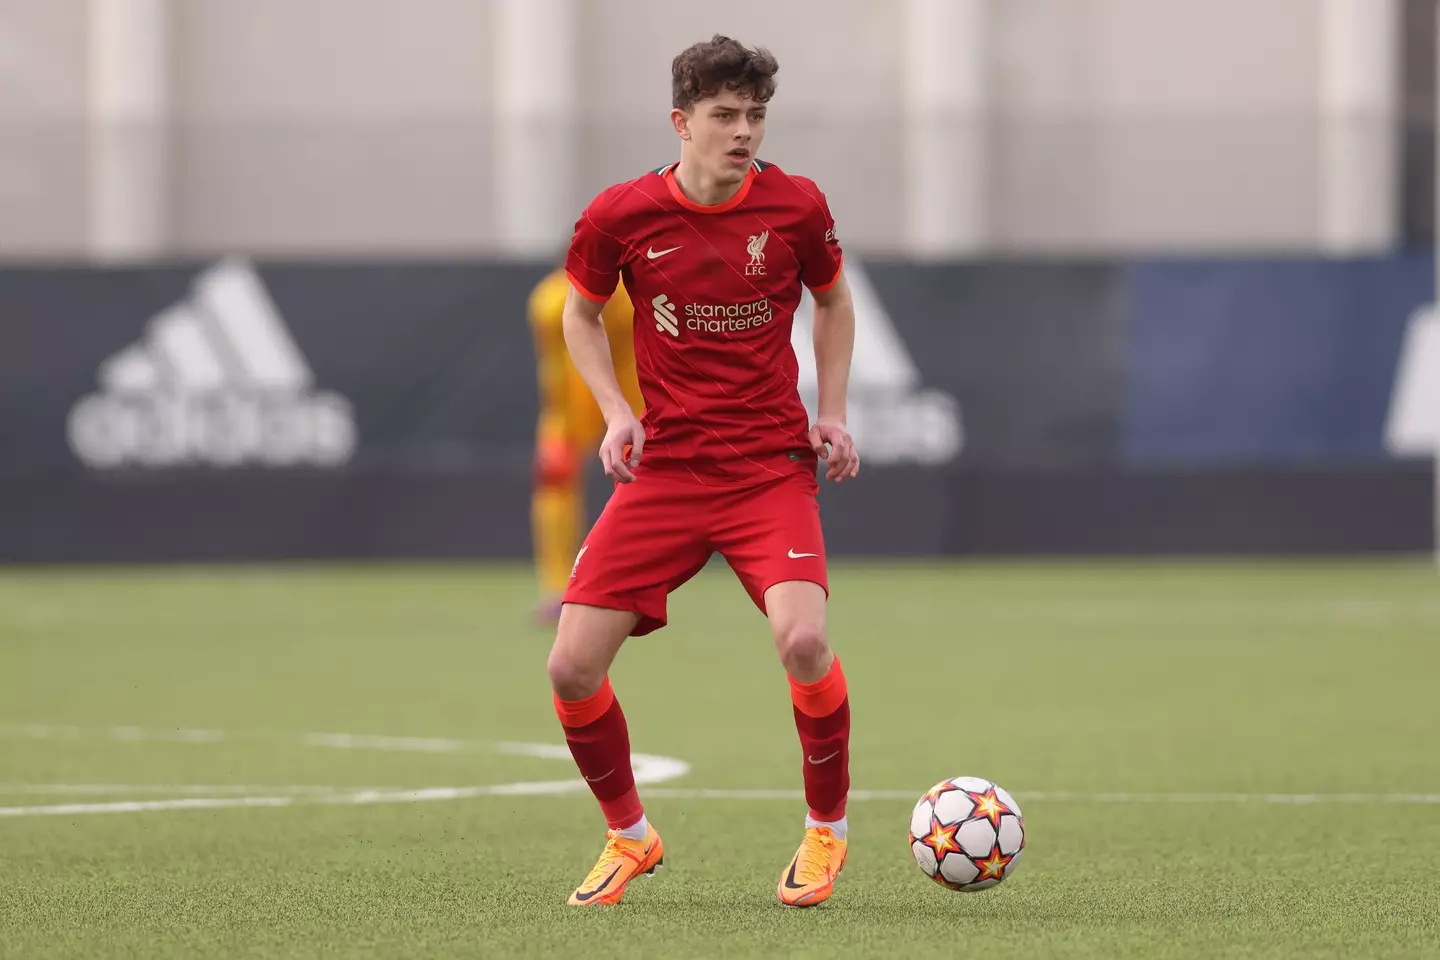 Owen Beck of Liverpool during the UEFA Youth League match at the Juventus Center, Vinovo.